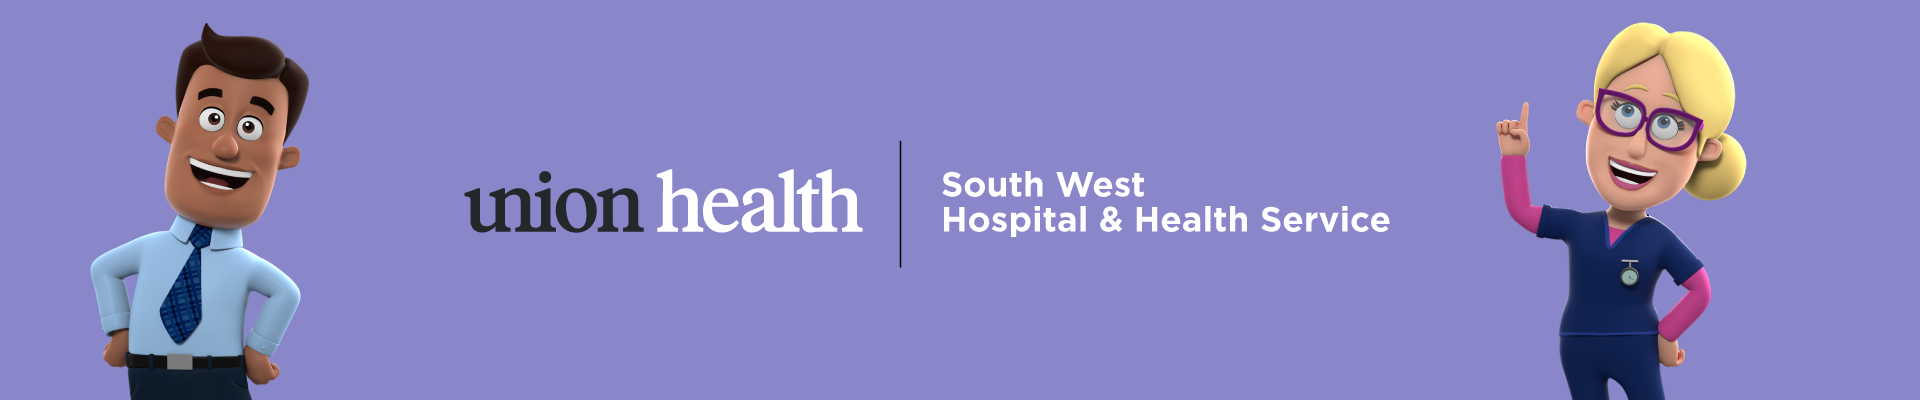 UH-South-West-HHS-1920x400.png